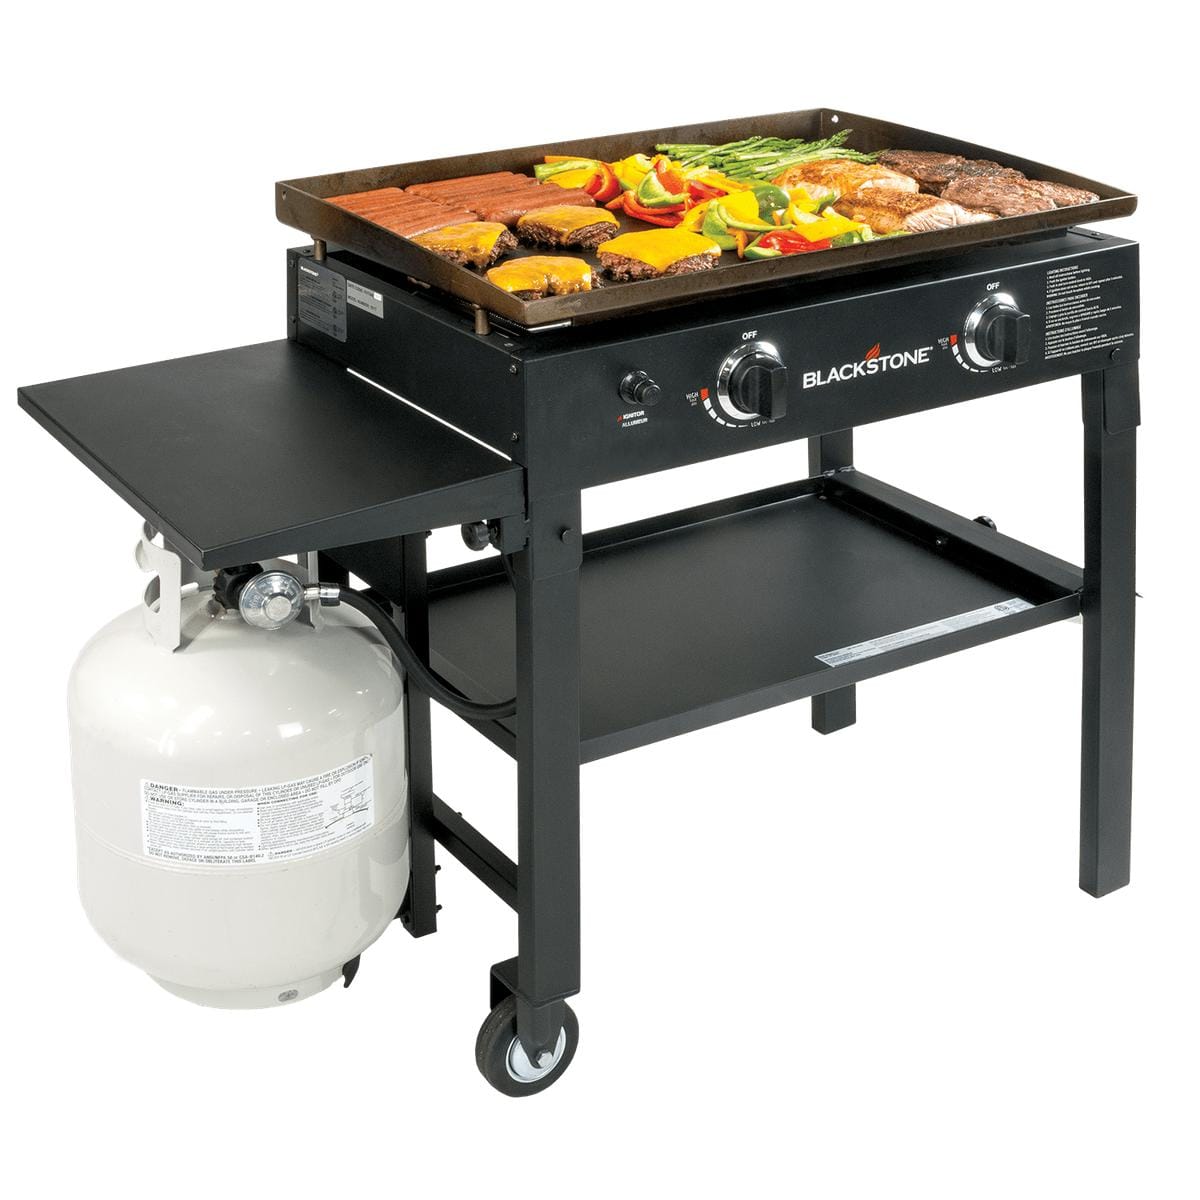 Blackstone Truck Freight - Not Qualified for Free Shipping Blackstone 28" Griddle Cooking Station #1517